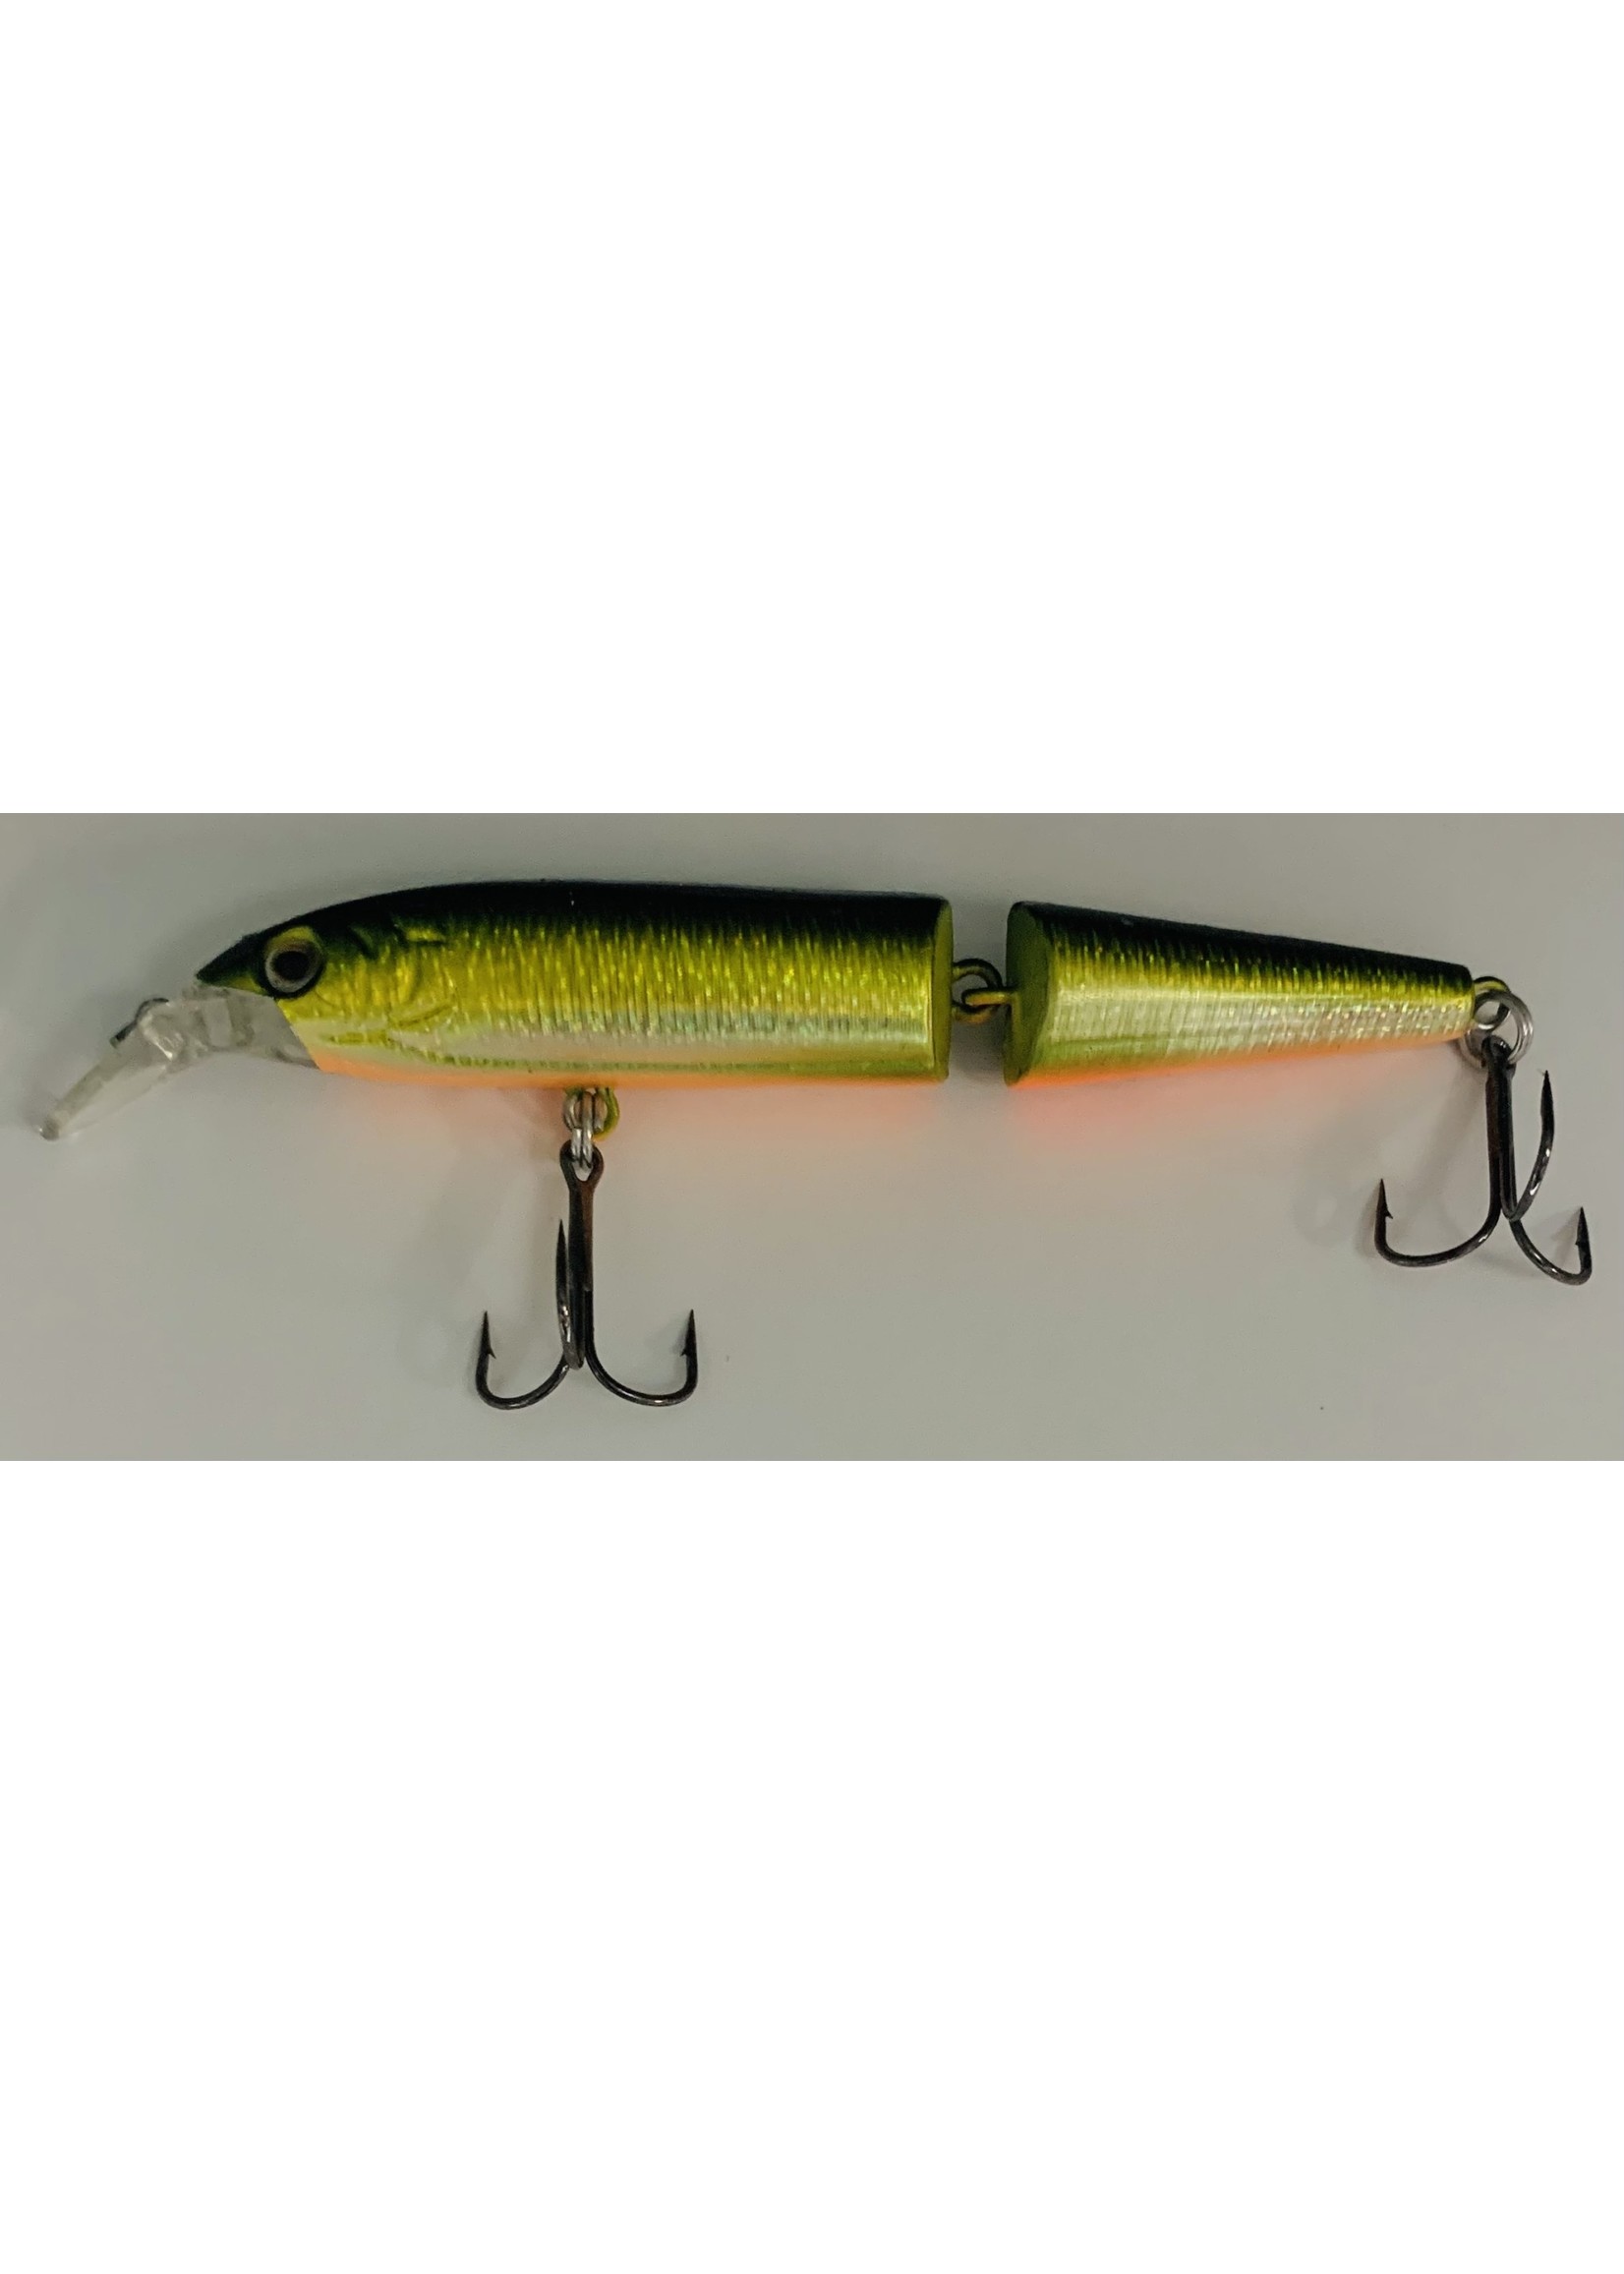 BELL OUTDOOR PRODUCTS SLIVER CREEK LURE JOINTED MINNOW 9cm  DIVE 3-5 FT